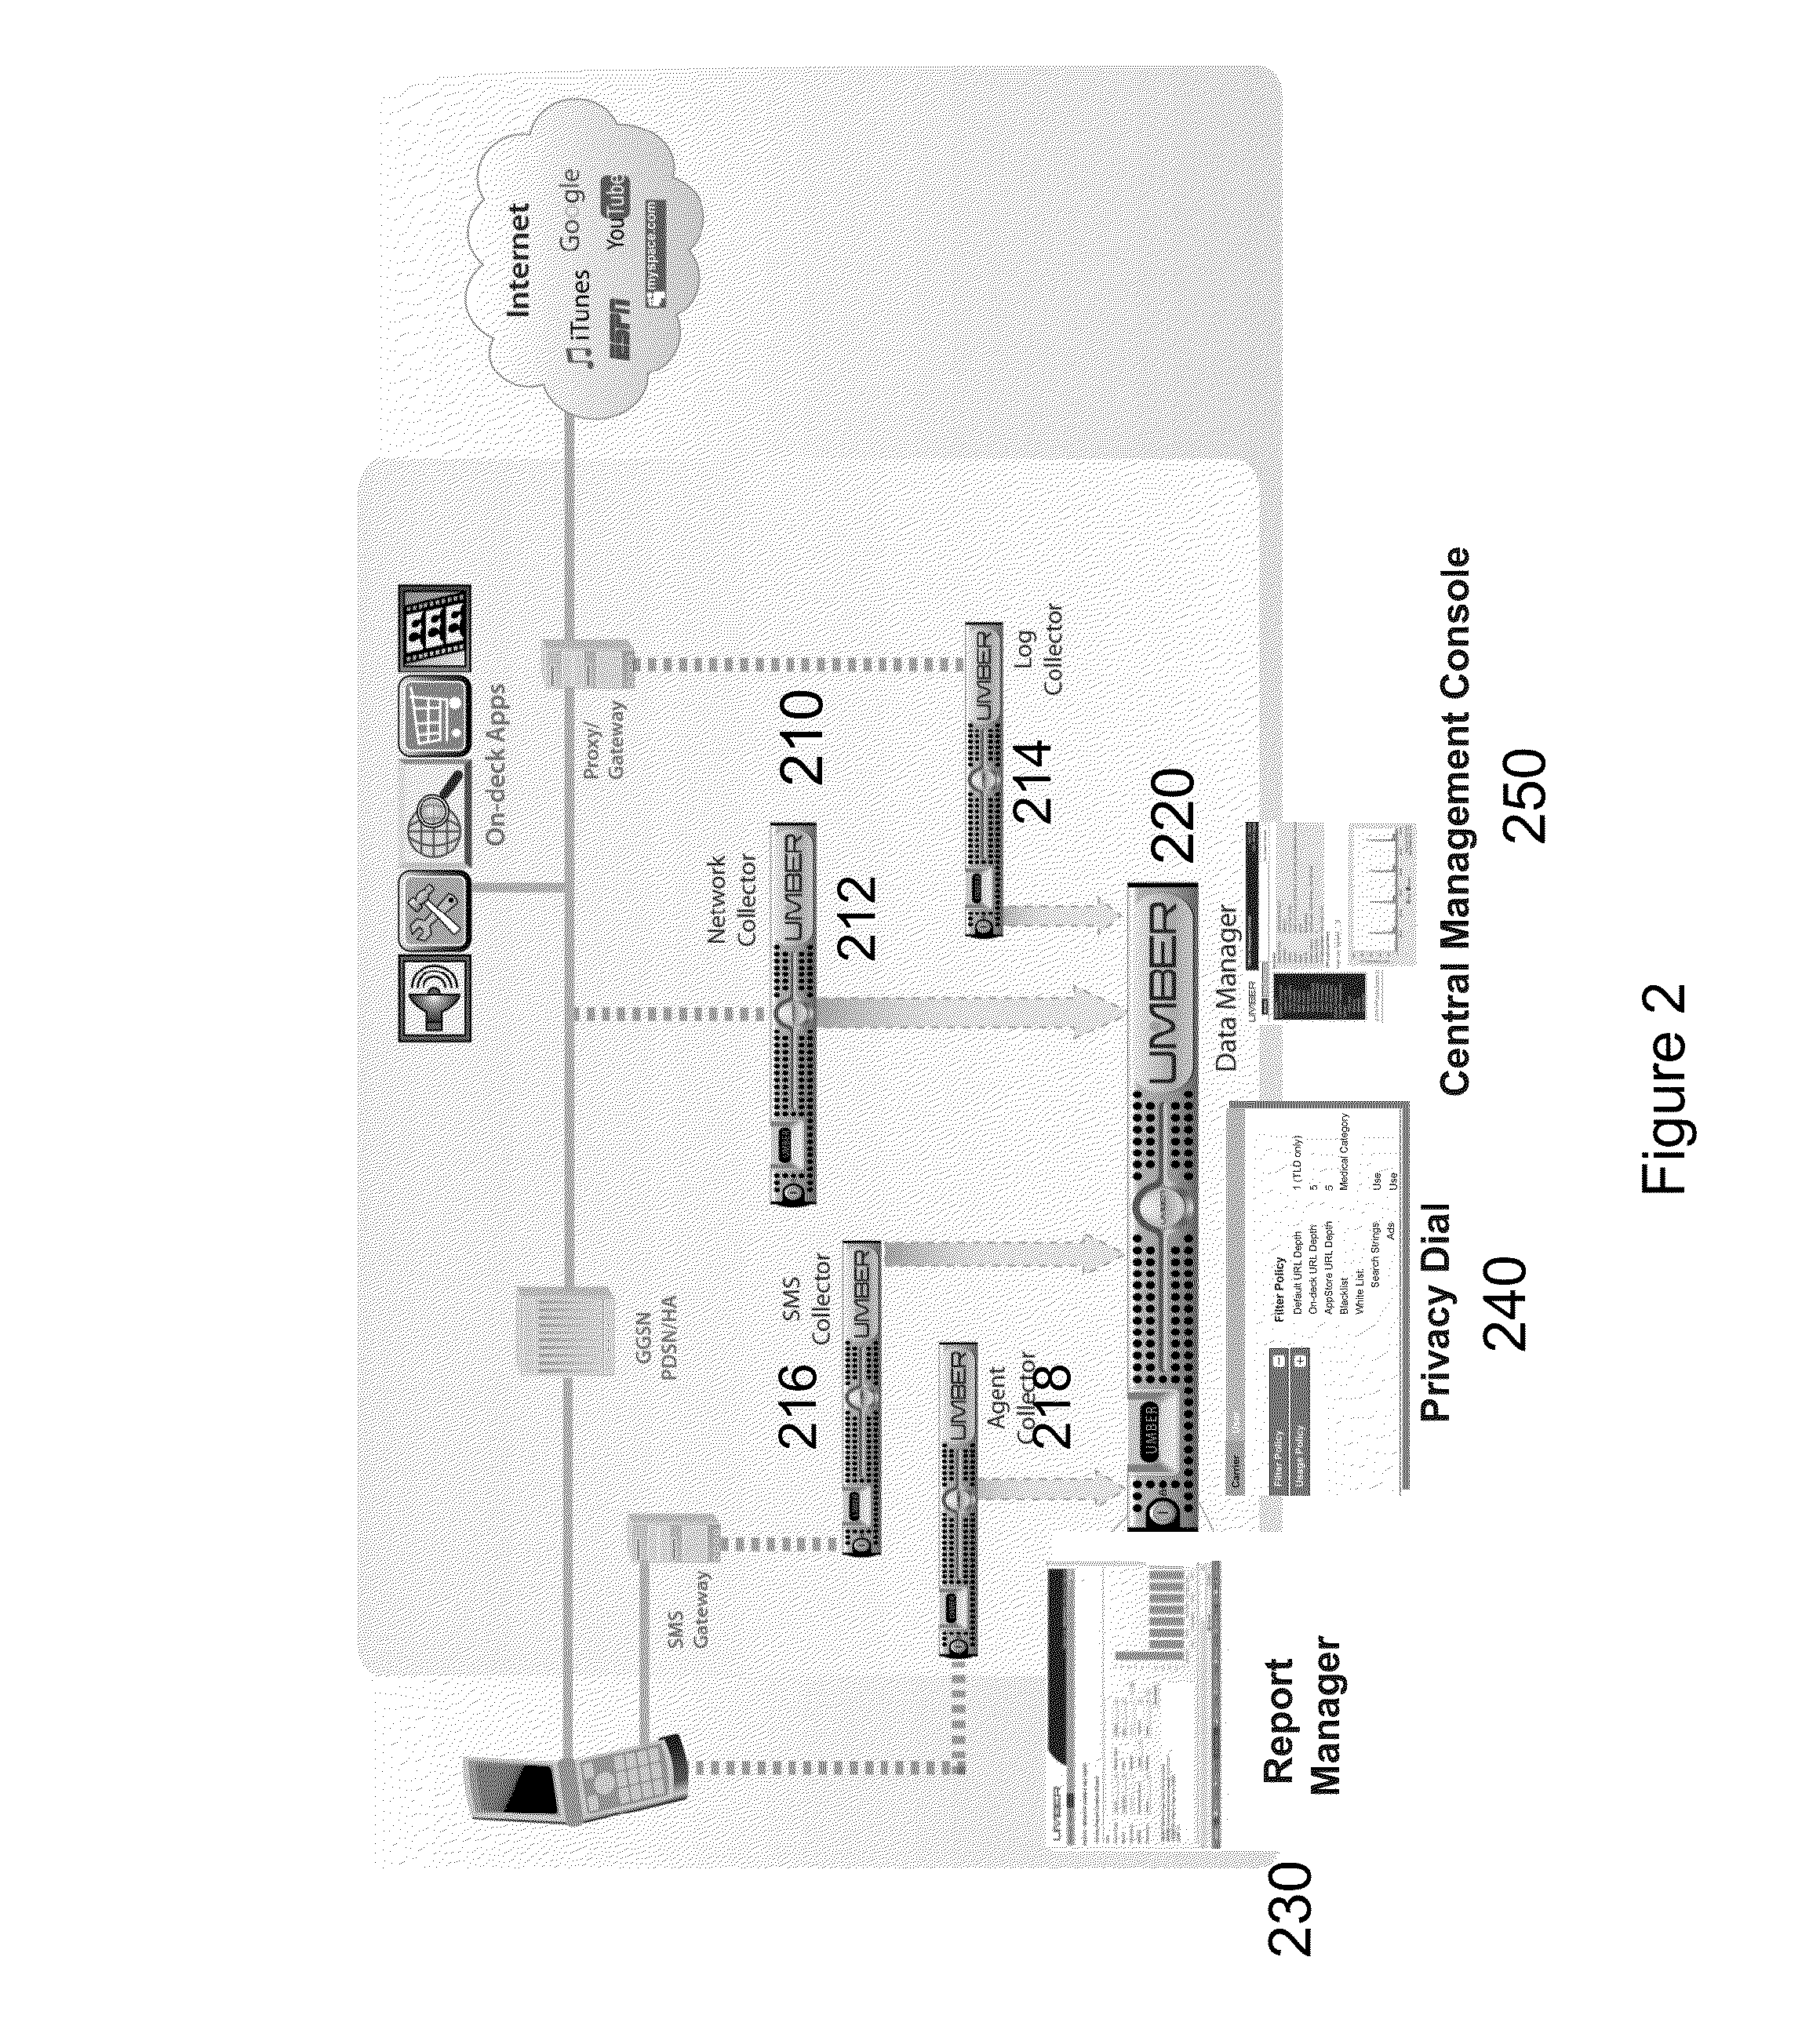 Method and apparatus for privacy-safe actionable analytics on mobile data usage